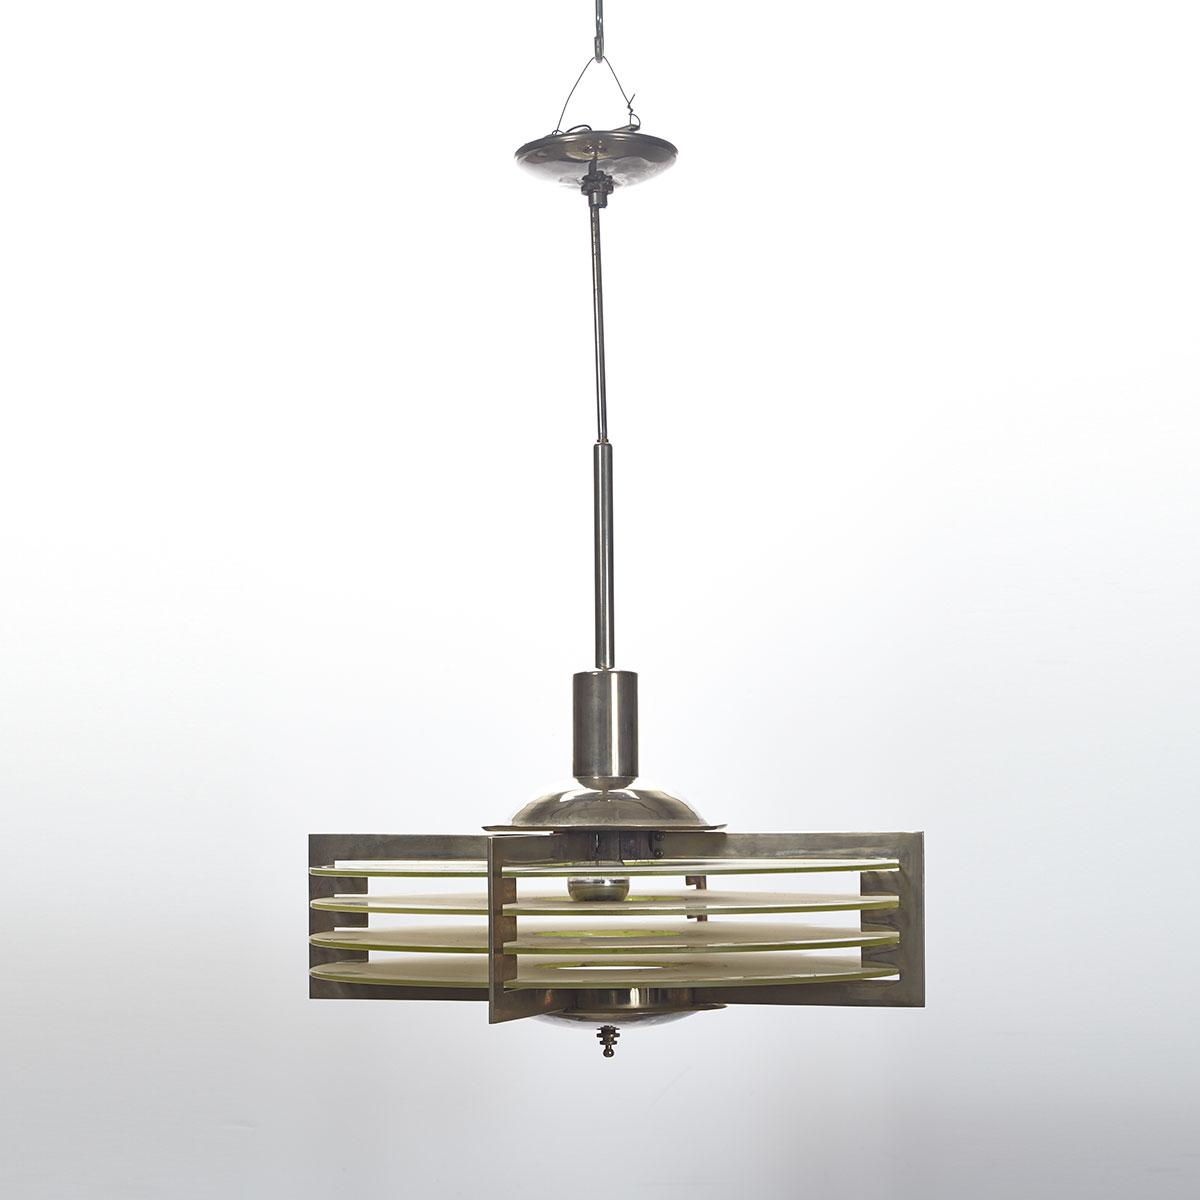 Art Deco Nickel and Etched Glass Chandelier, mid 20th century